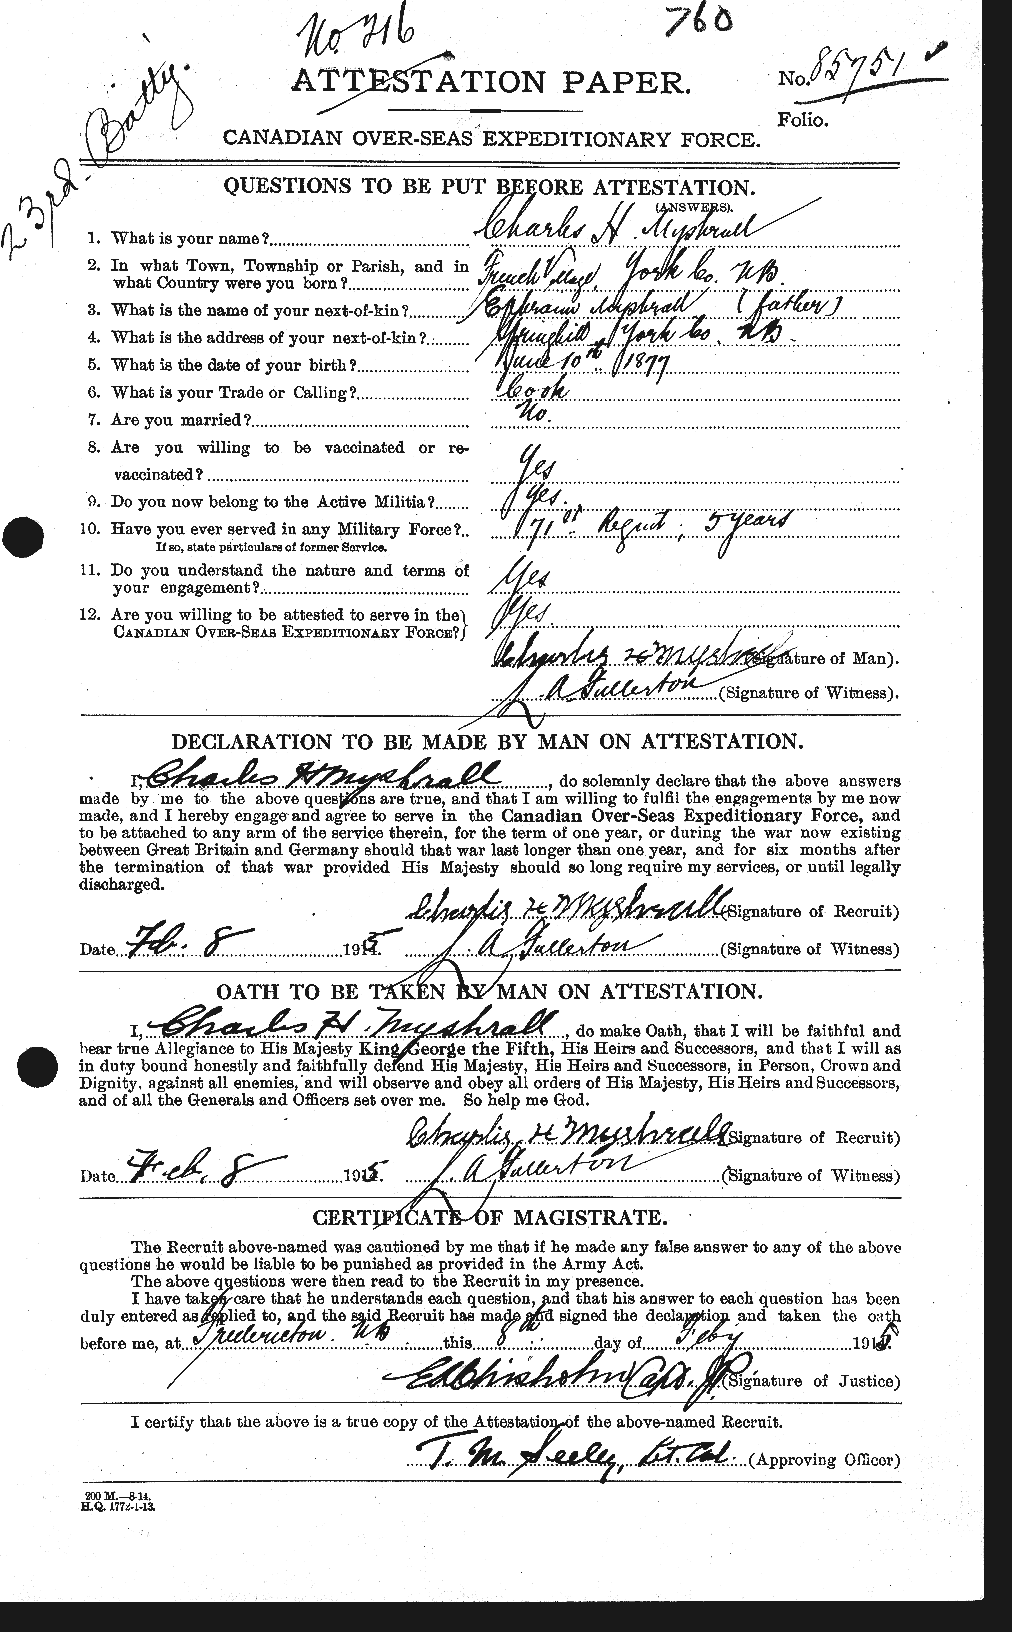 Personnel Records of the First World War - CEF 518051a